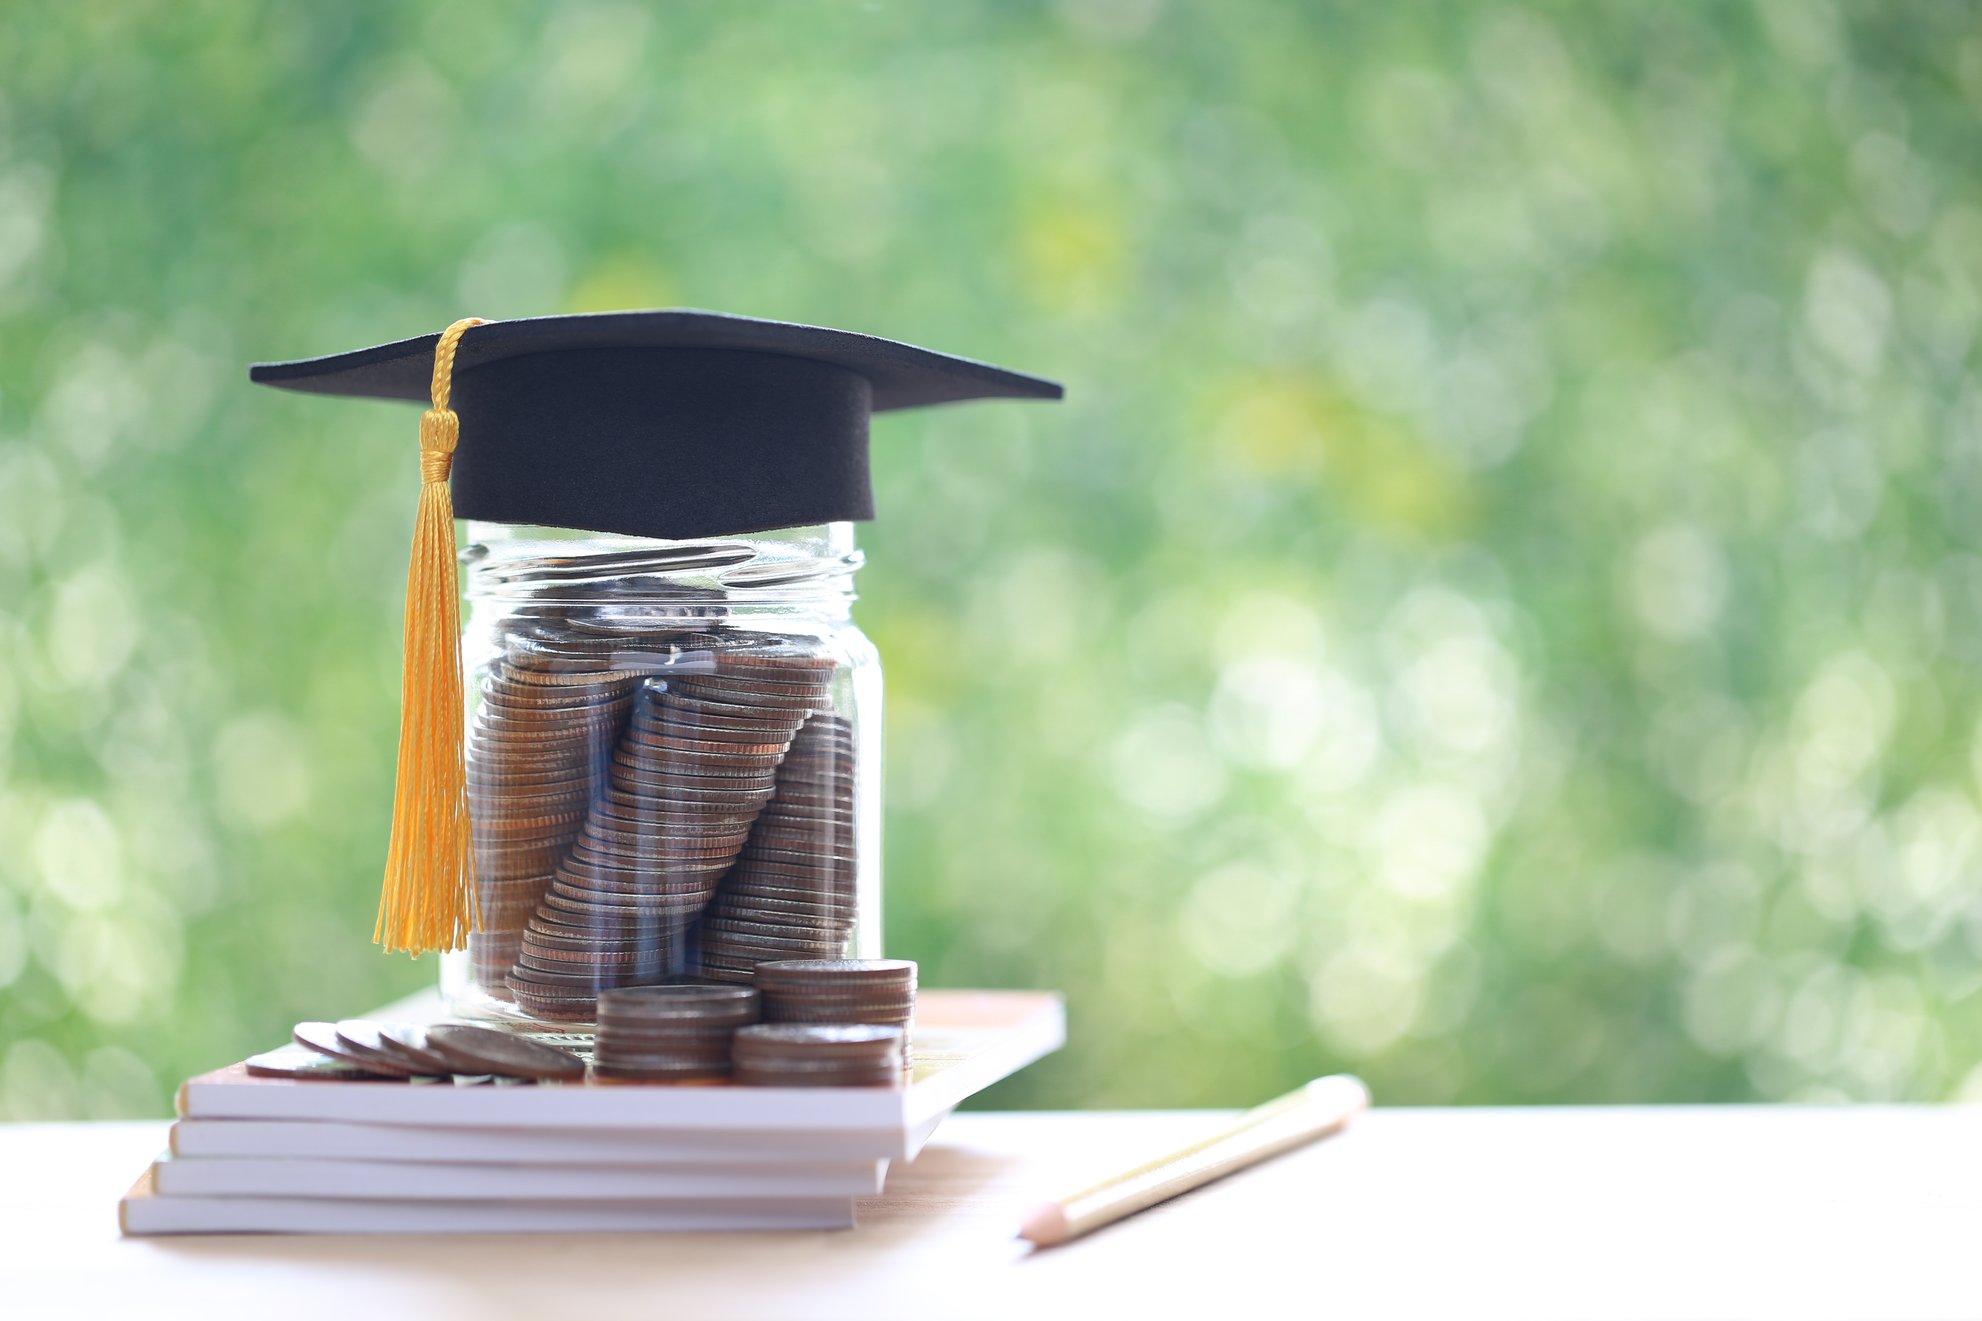 Coin jar with graduation cap sitting on notebooks